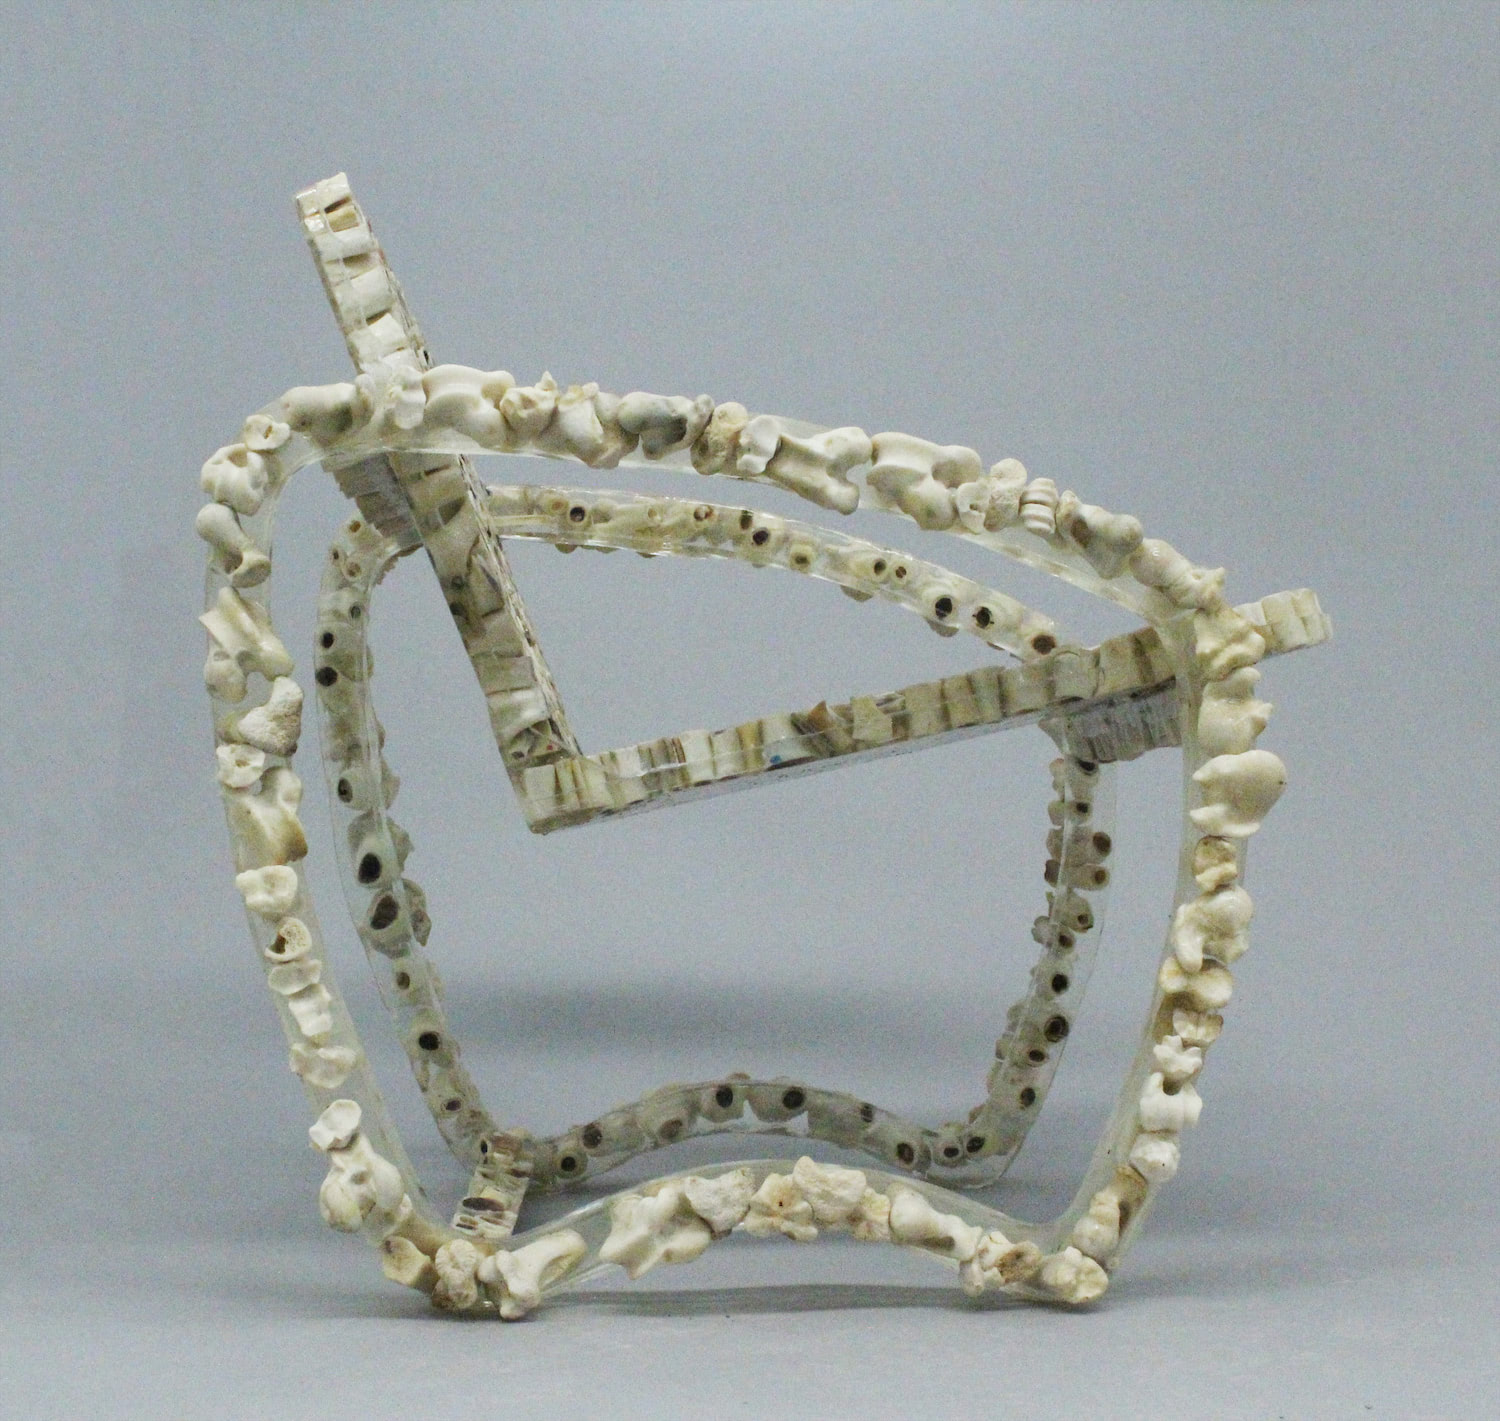 Side view of the Bone Chair.